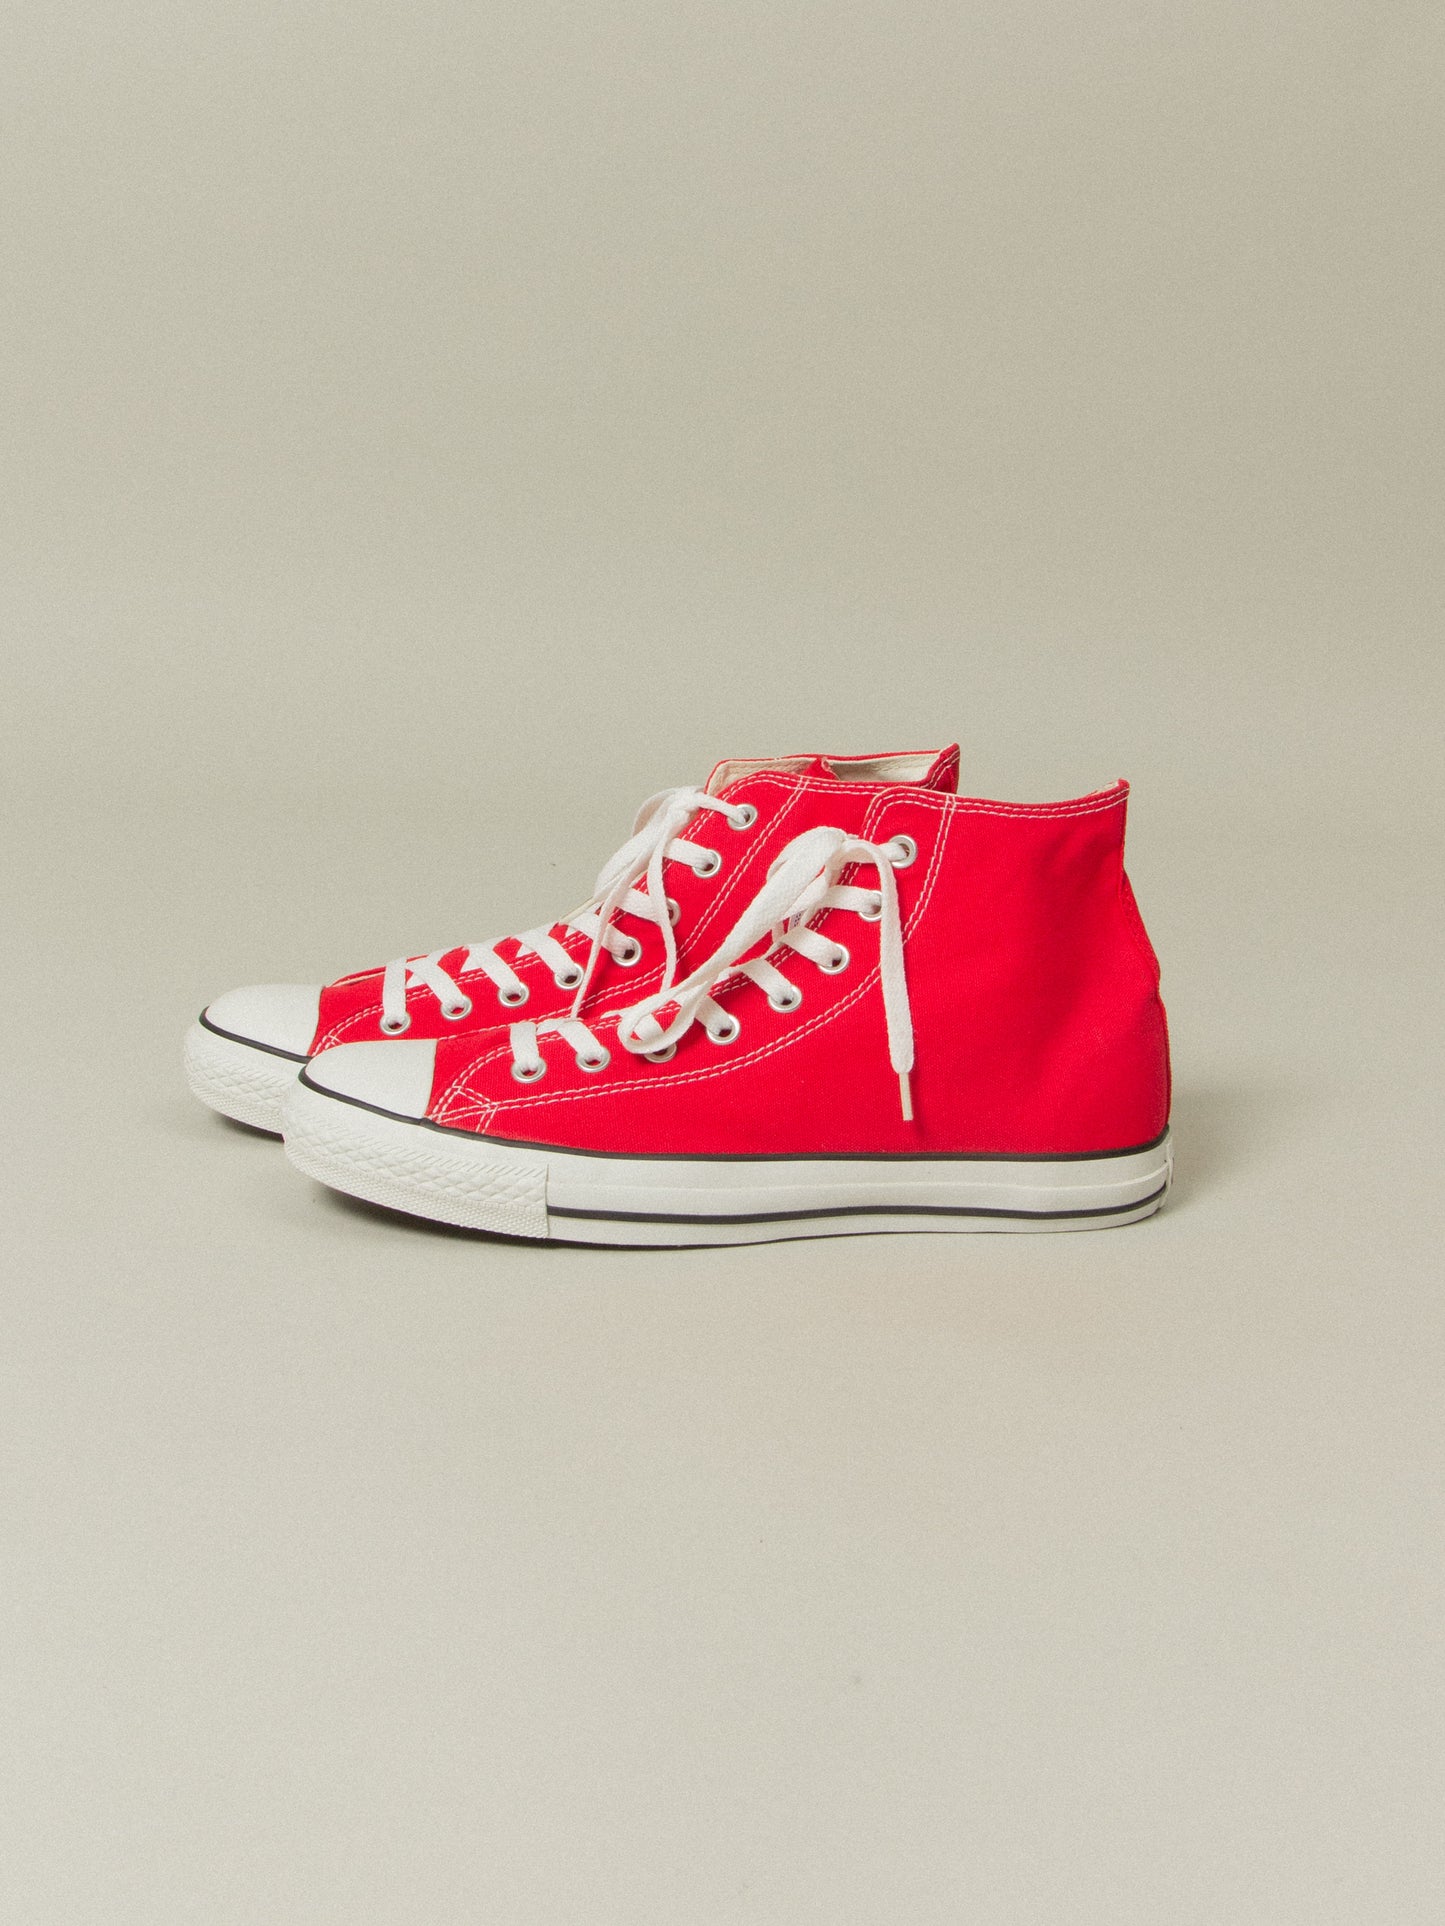 NOS Early 2000s Converse All Star - Red